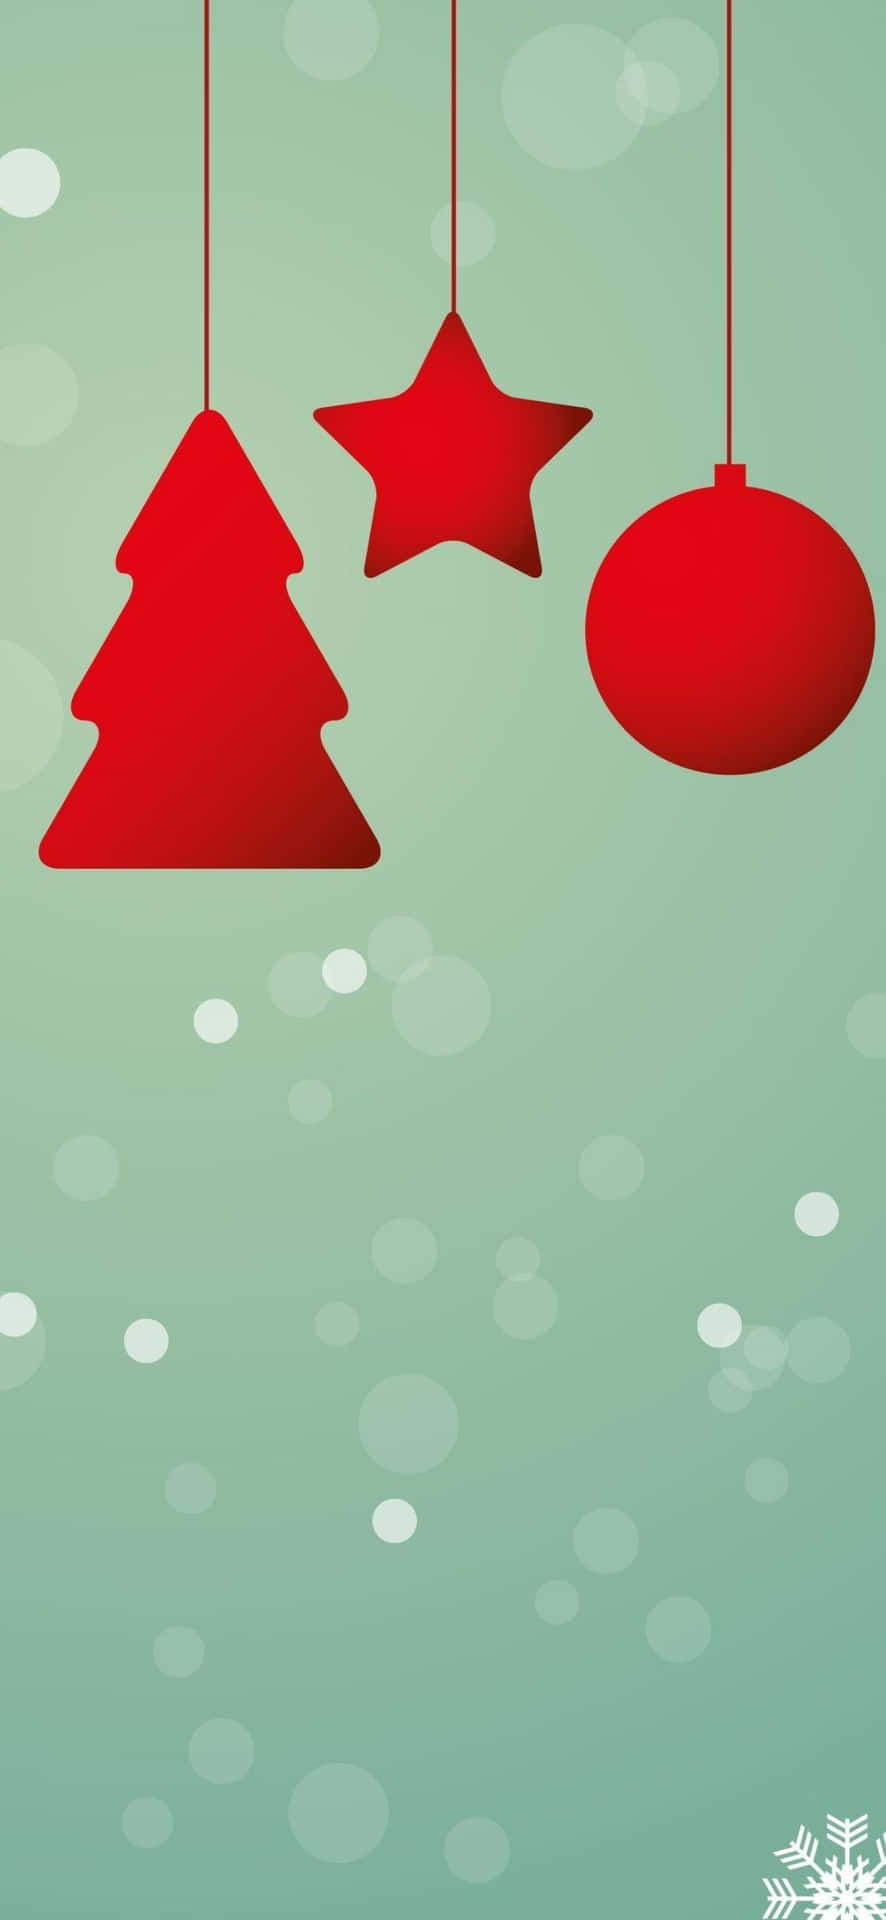 Spice up your iPhone this holiday season with this festive Christmas background.